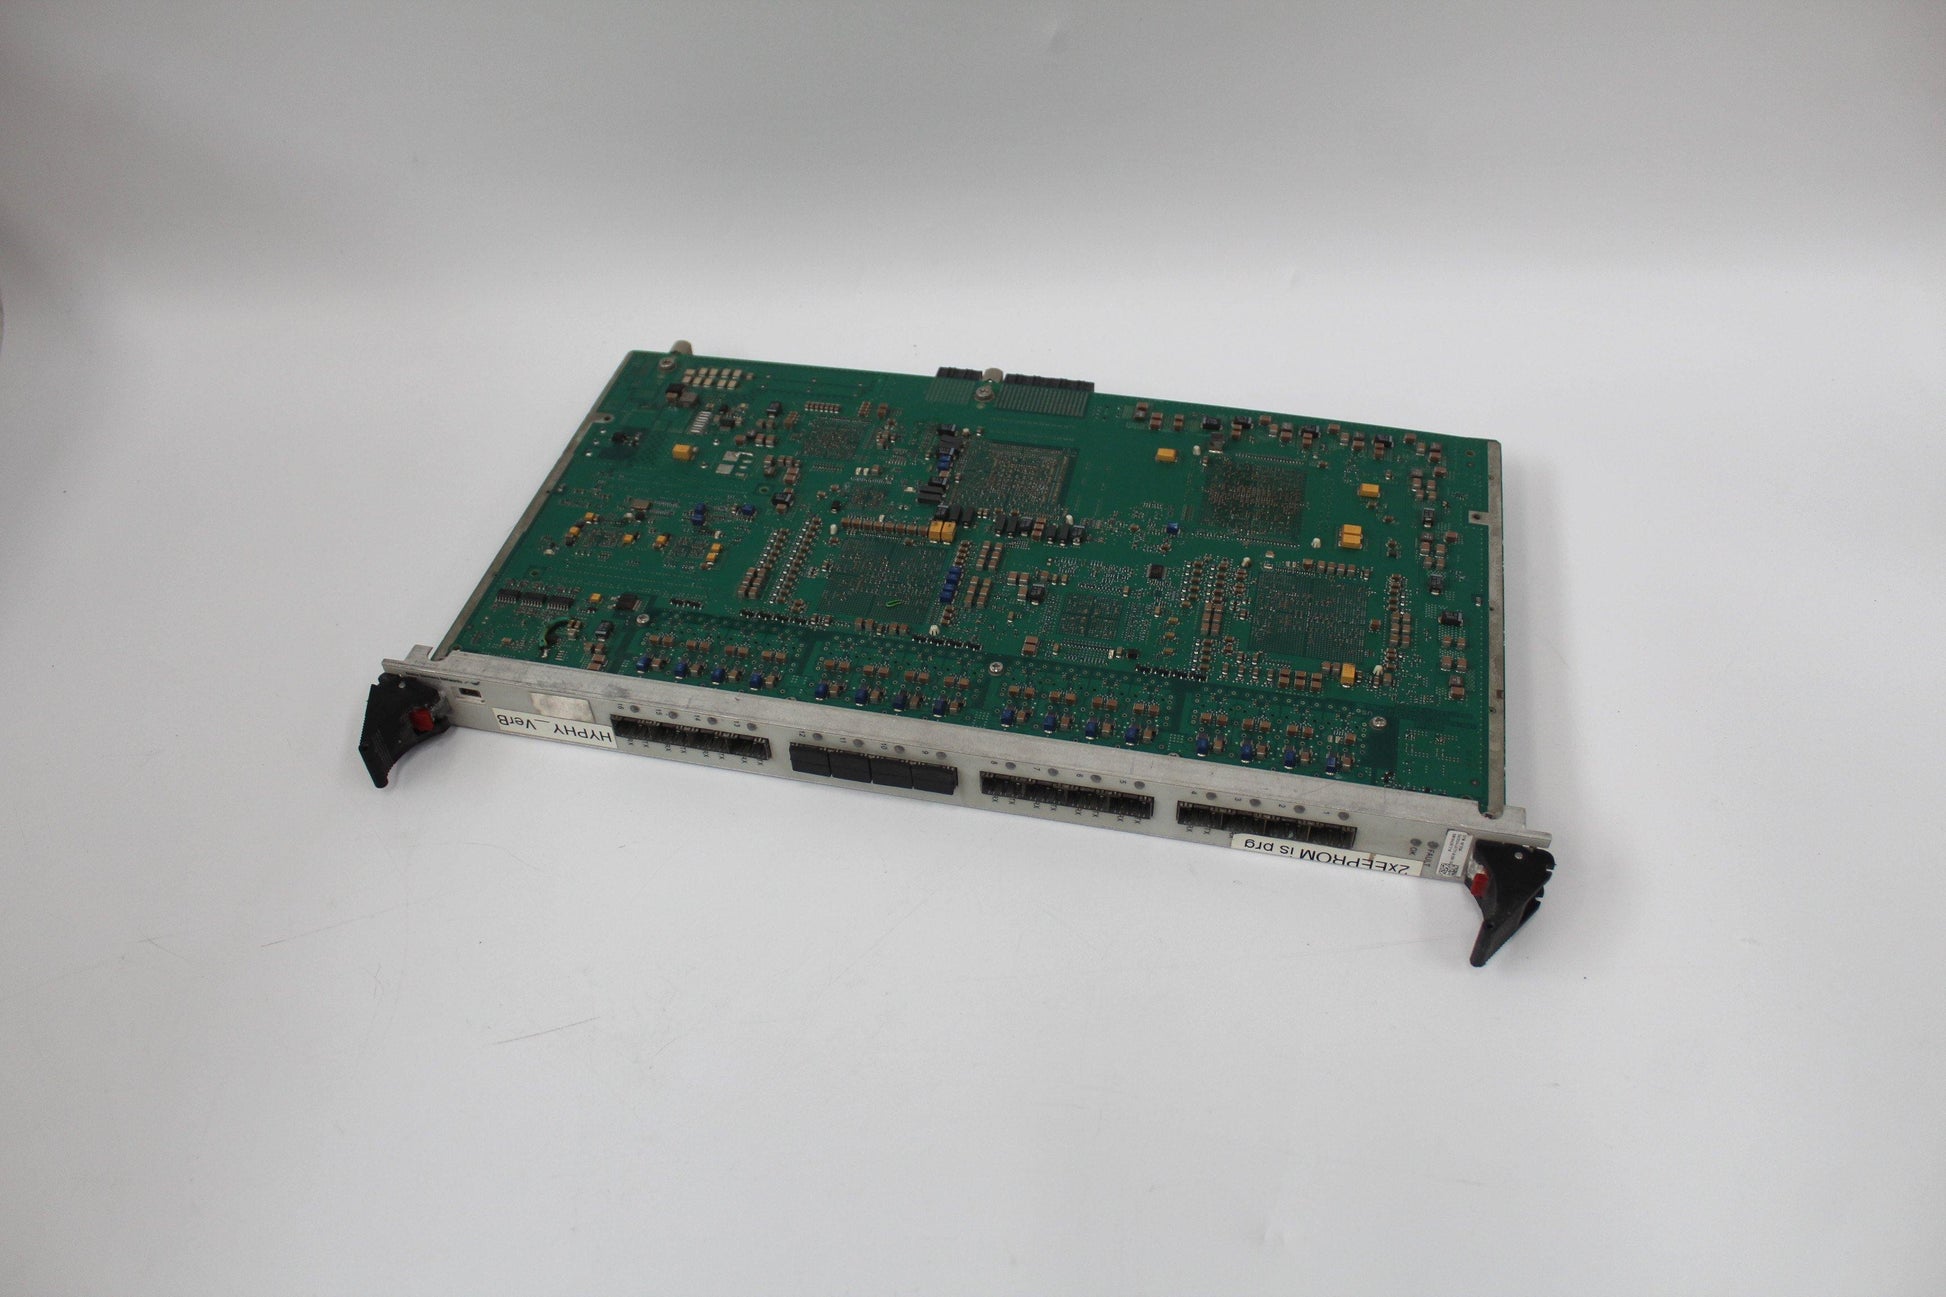 Used Nokia & Siemens Network Communication Board S42024-L5721-A100-1A - we